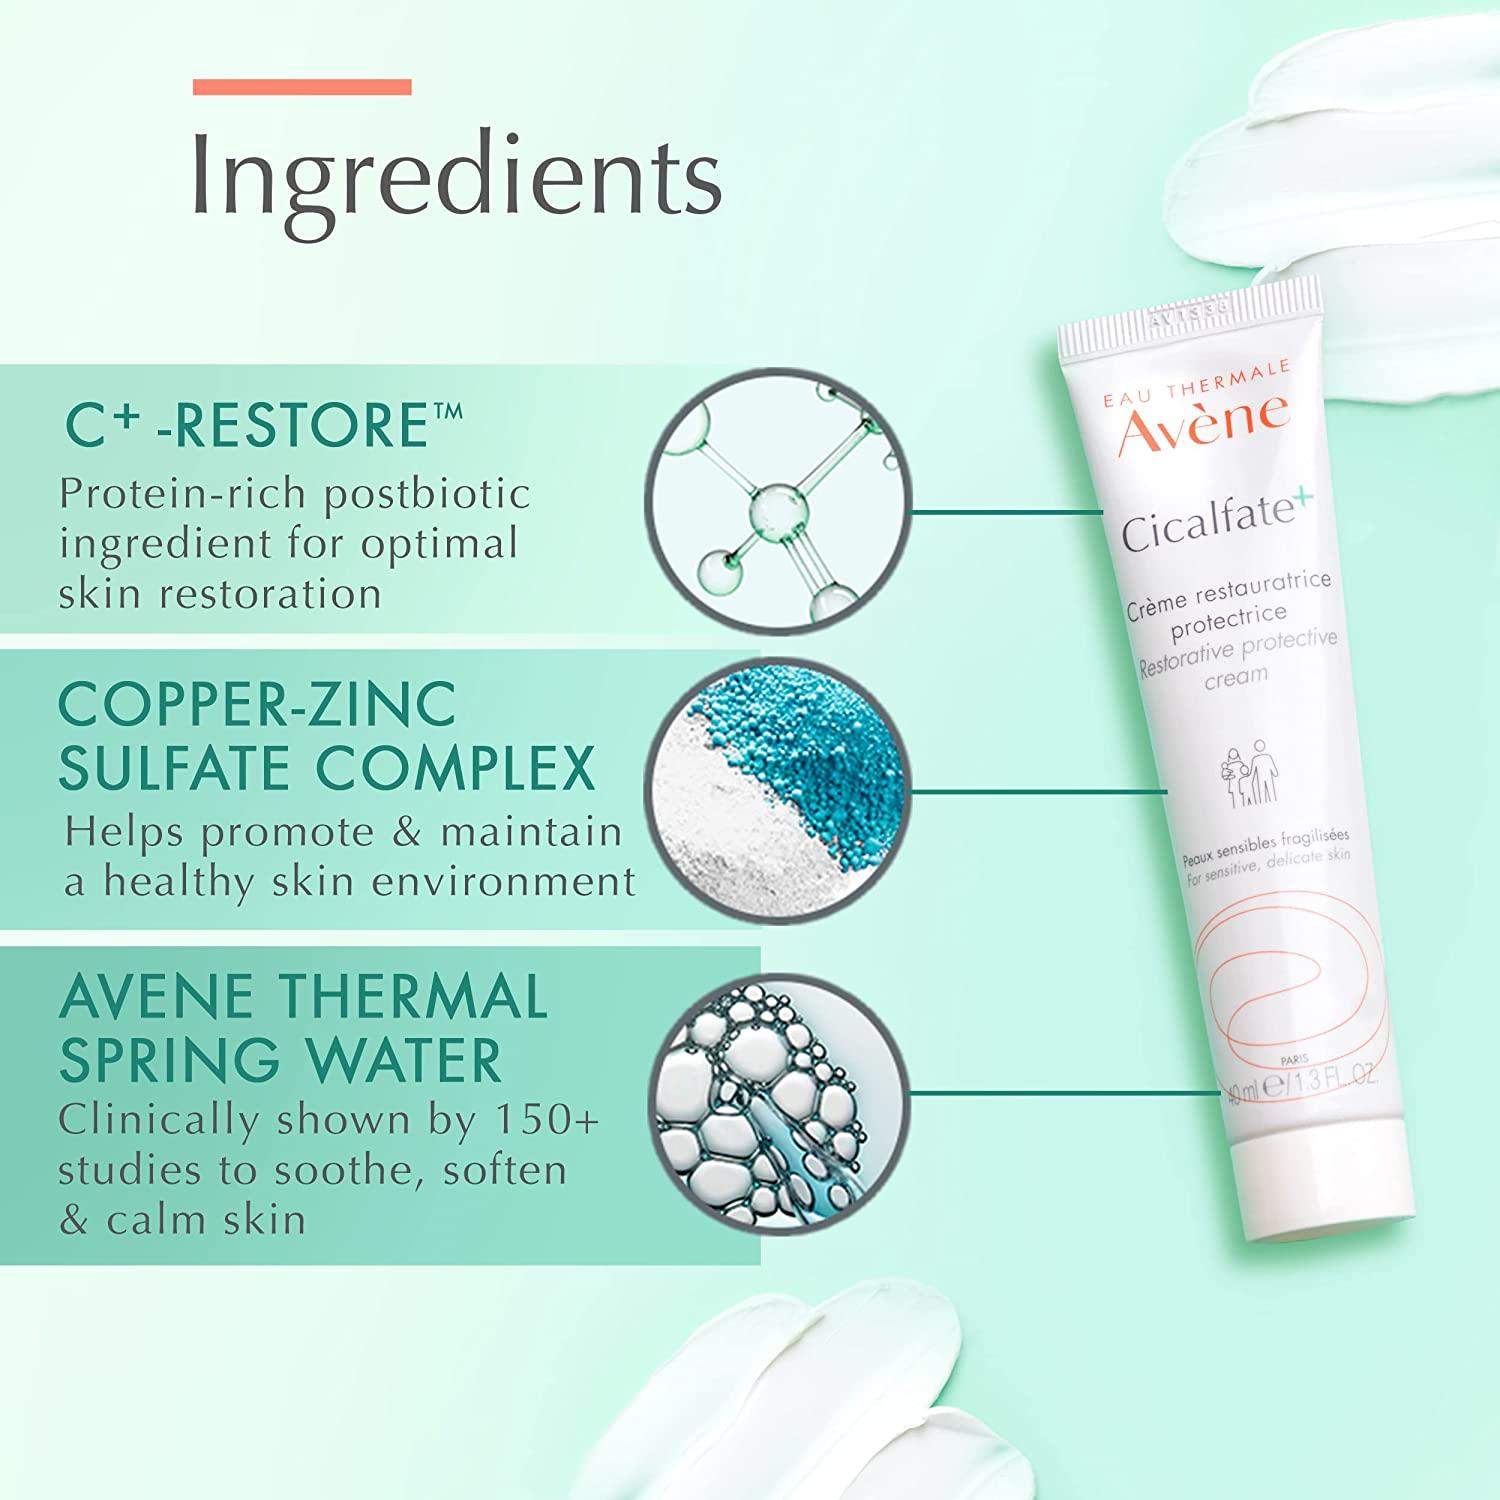 Eau Thermale Avene Cicalfate+ Restorative Protective Cream, Wound Care,  Reduce Appearance of Scars, Doctor Recommended, Zinc Oxide, 3.3 fl.oz. 